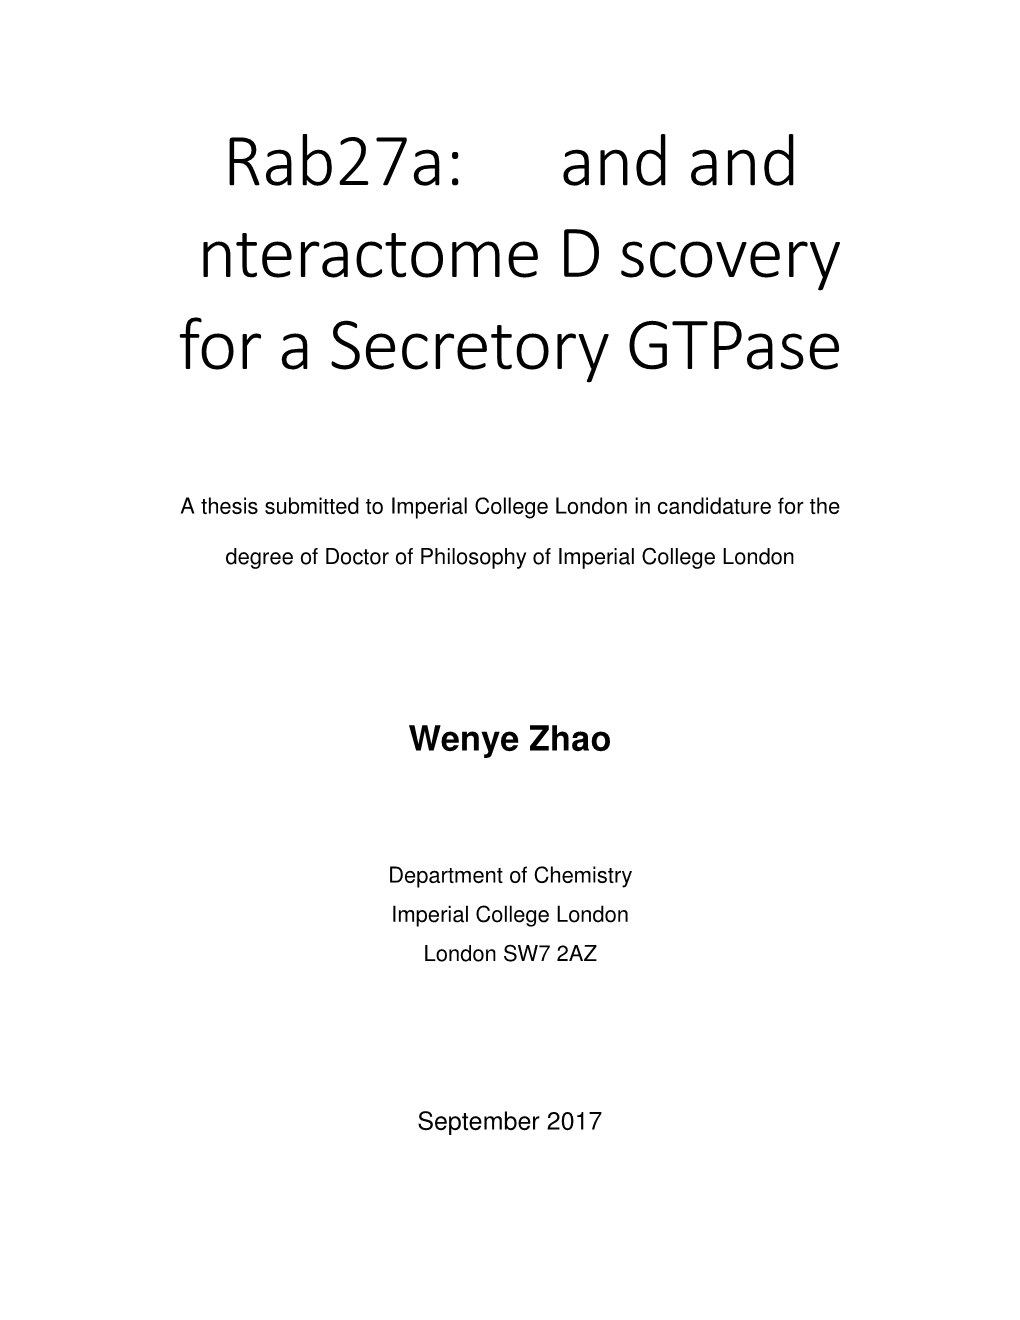 Rab27a: Ligand and Interactome Discovery for a Secretory Gtpase